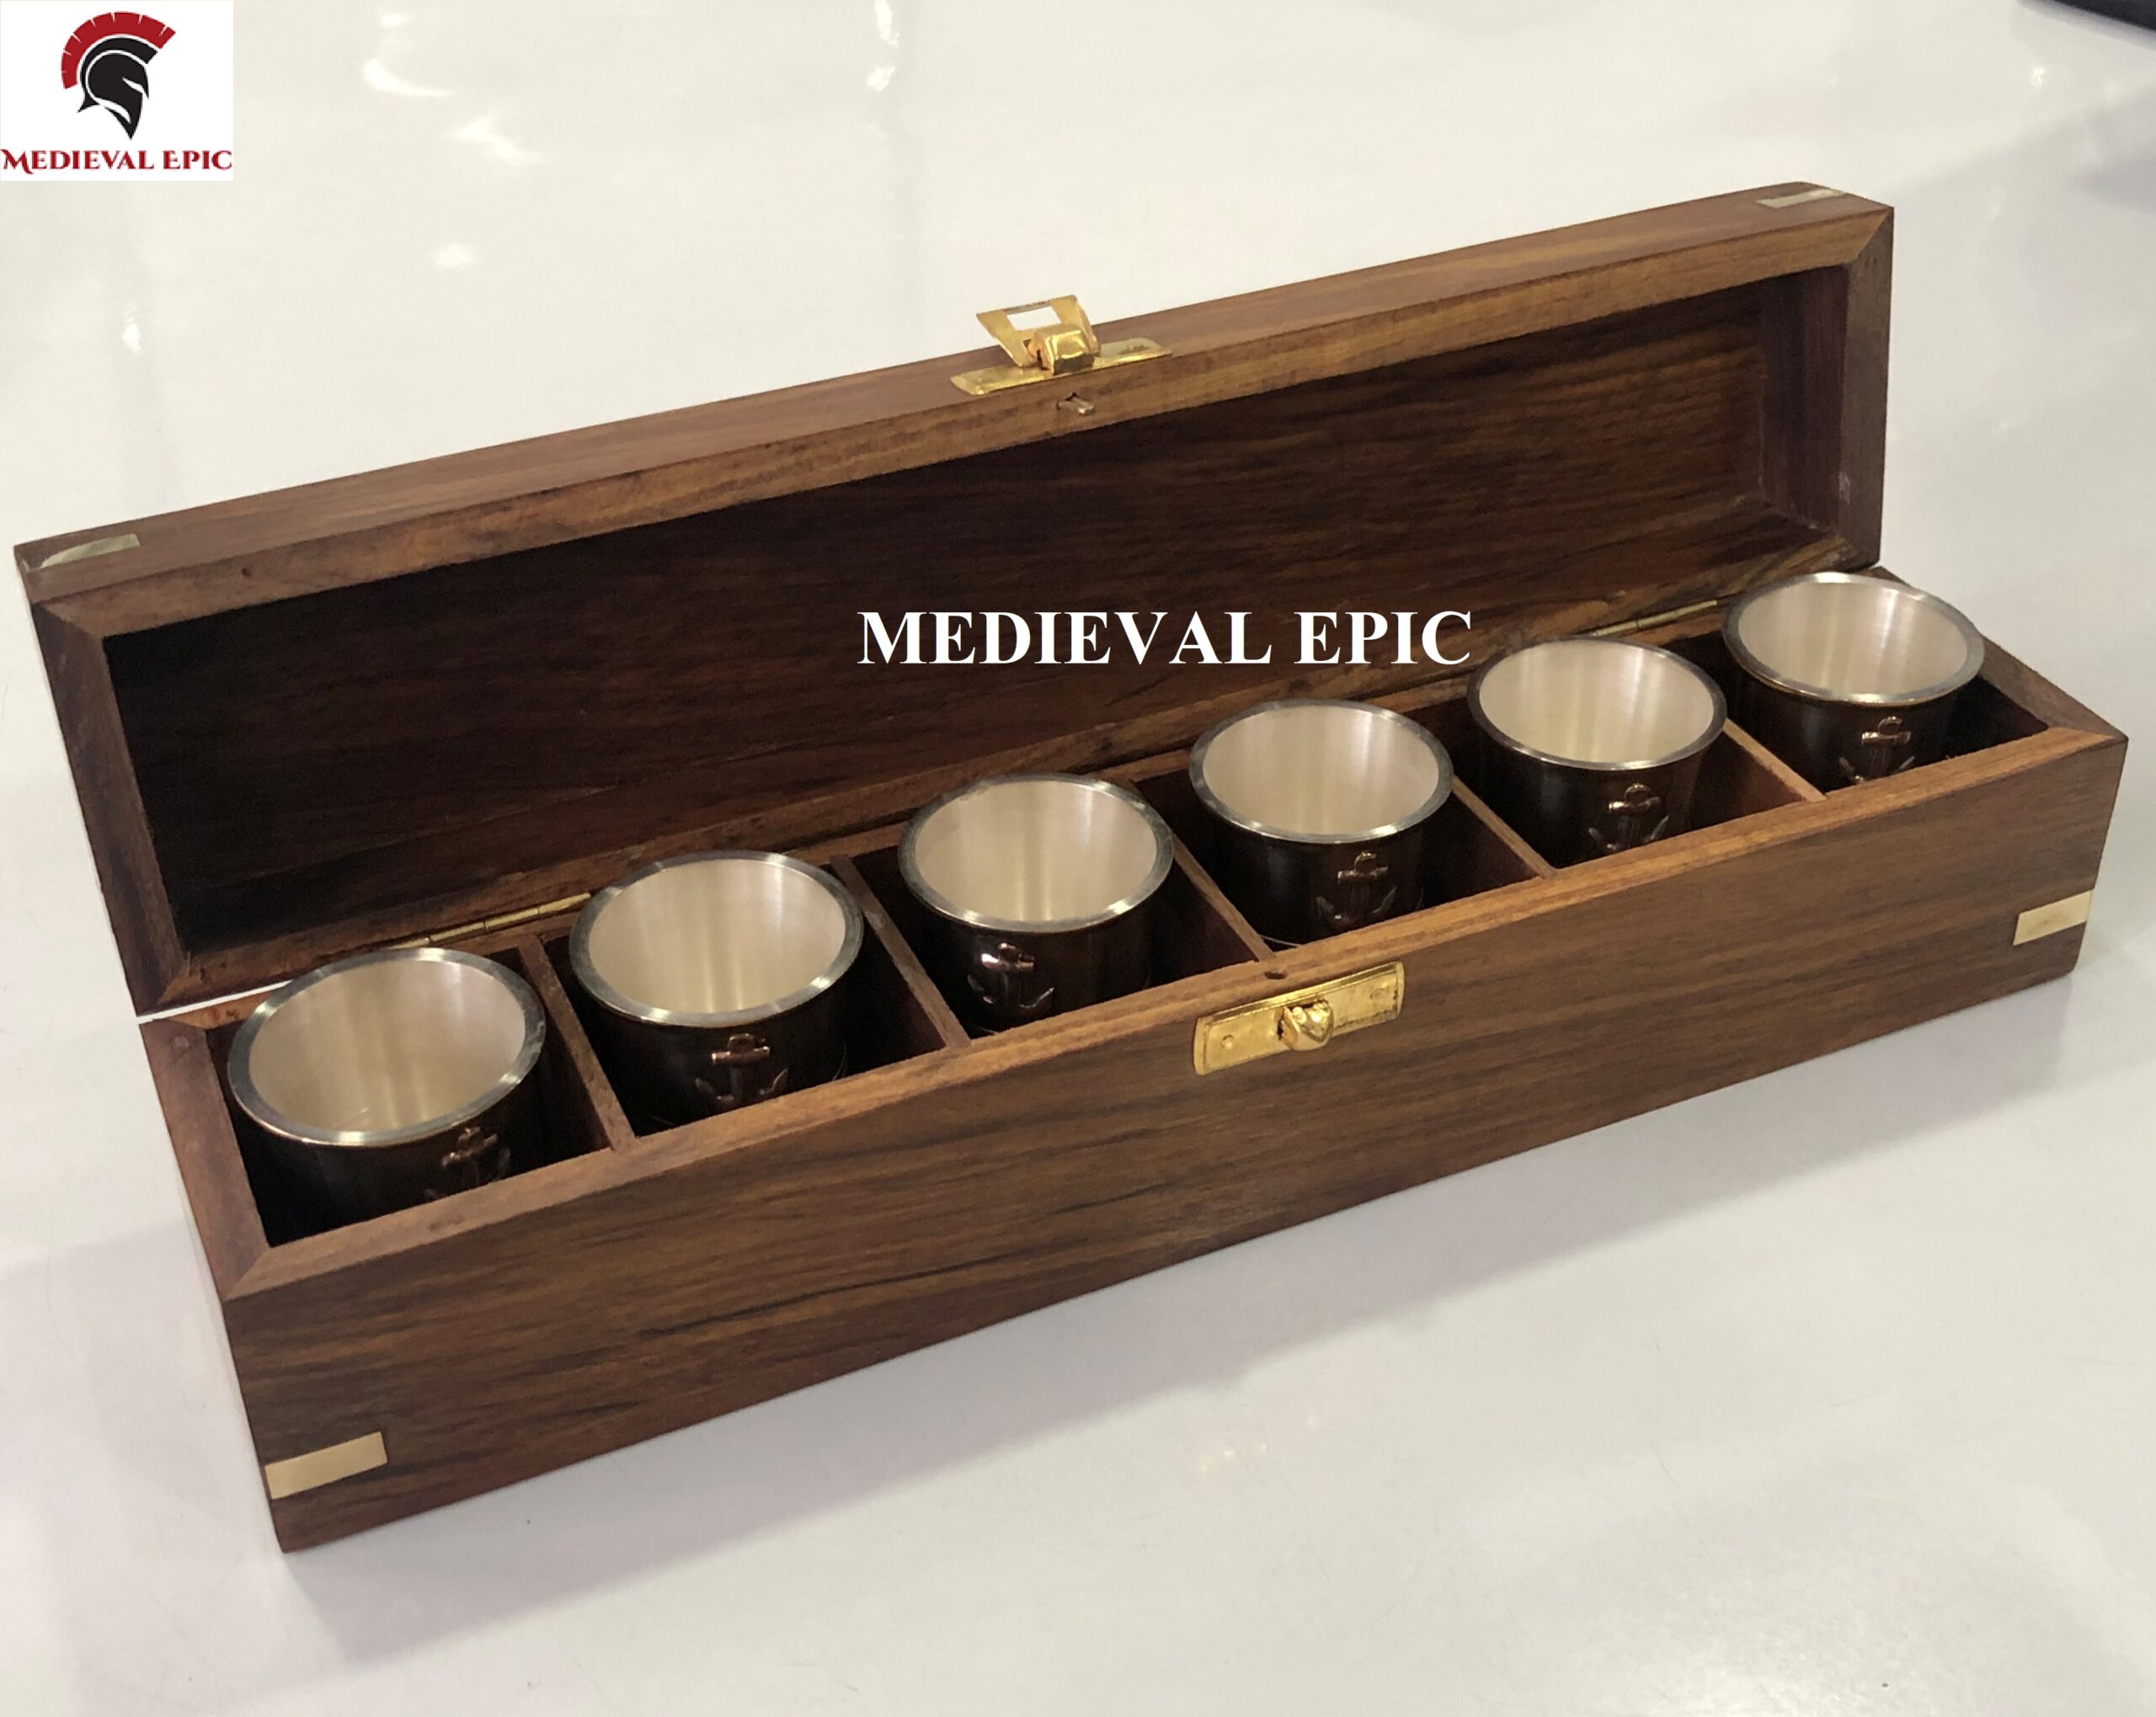 Details about   Brass Tequila Shot Glass with Anchor Monogram in Handmade Wooden Box Six Glass 